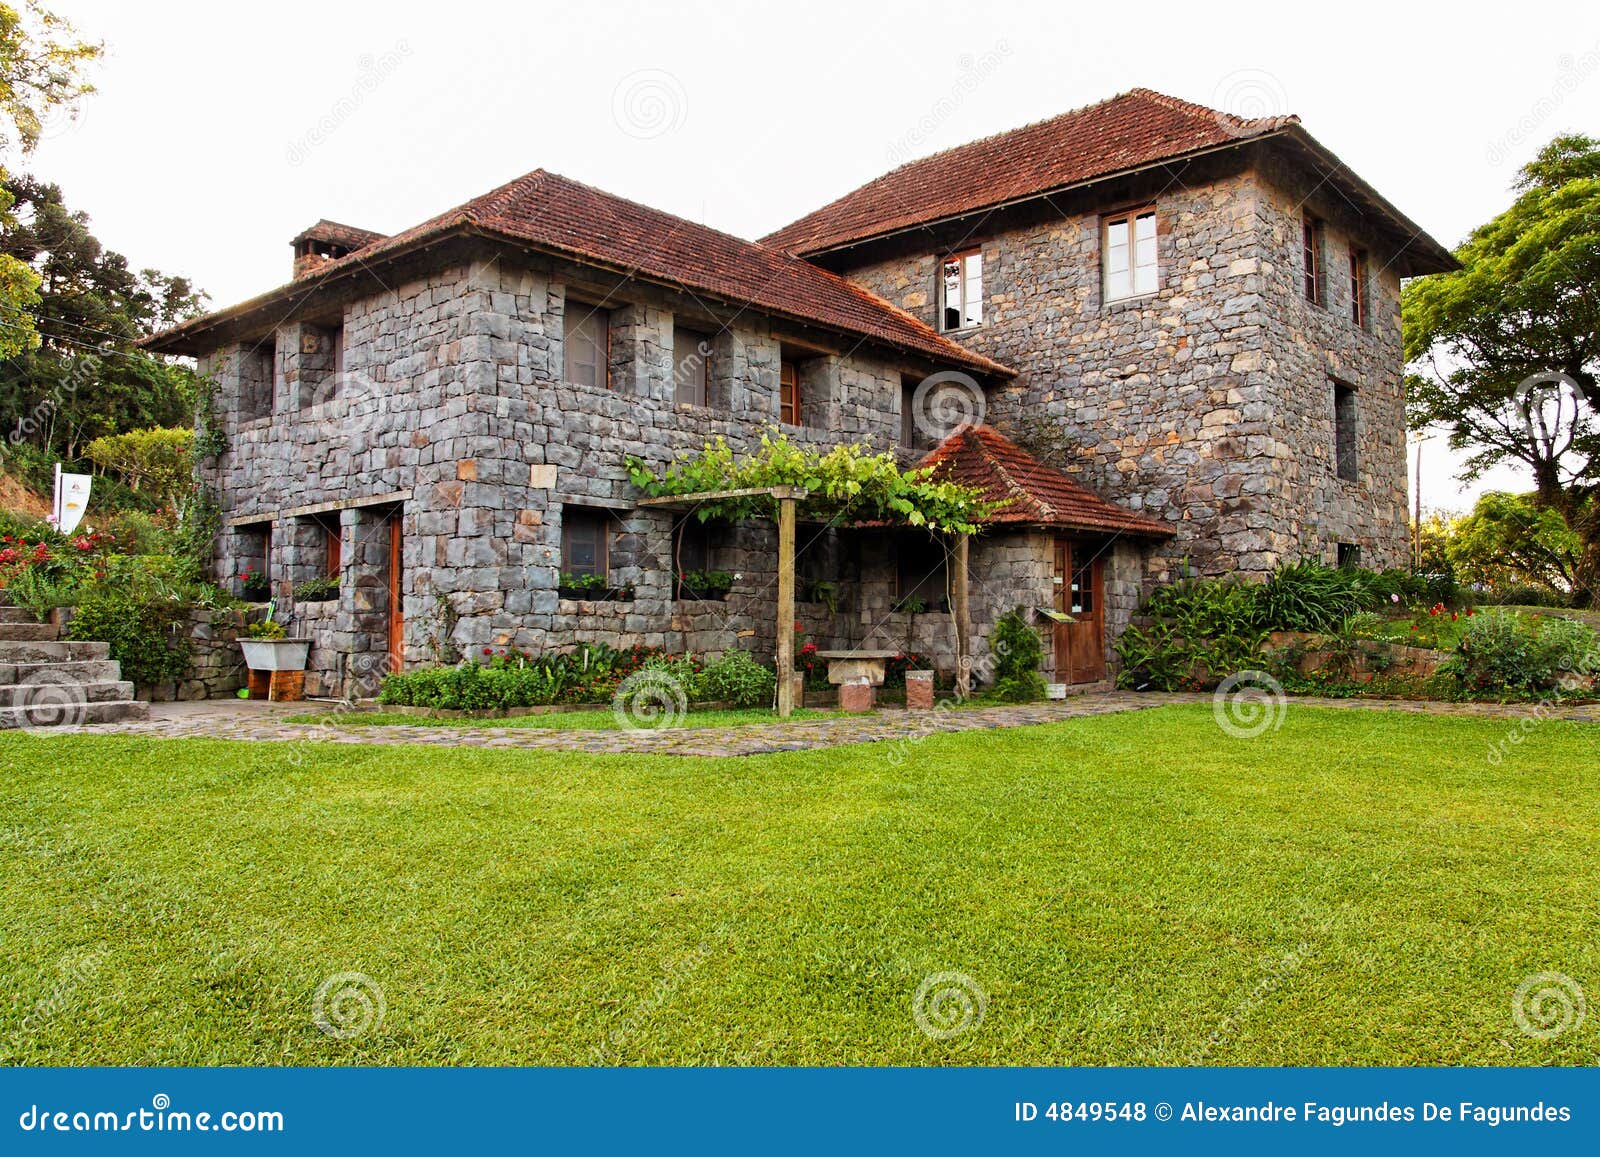 The Old Country Stone House